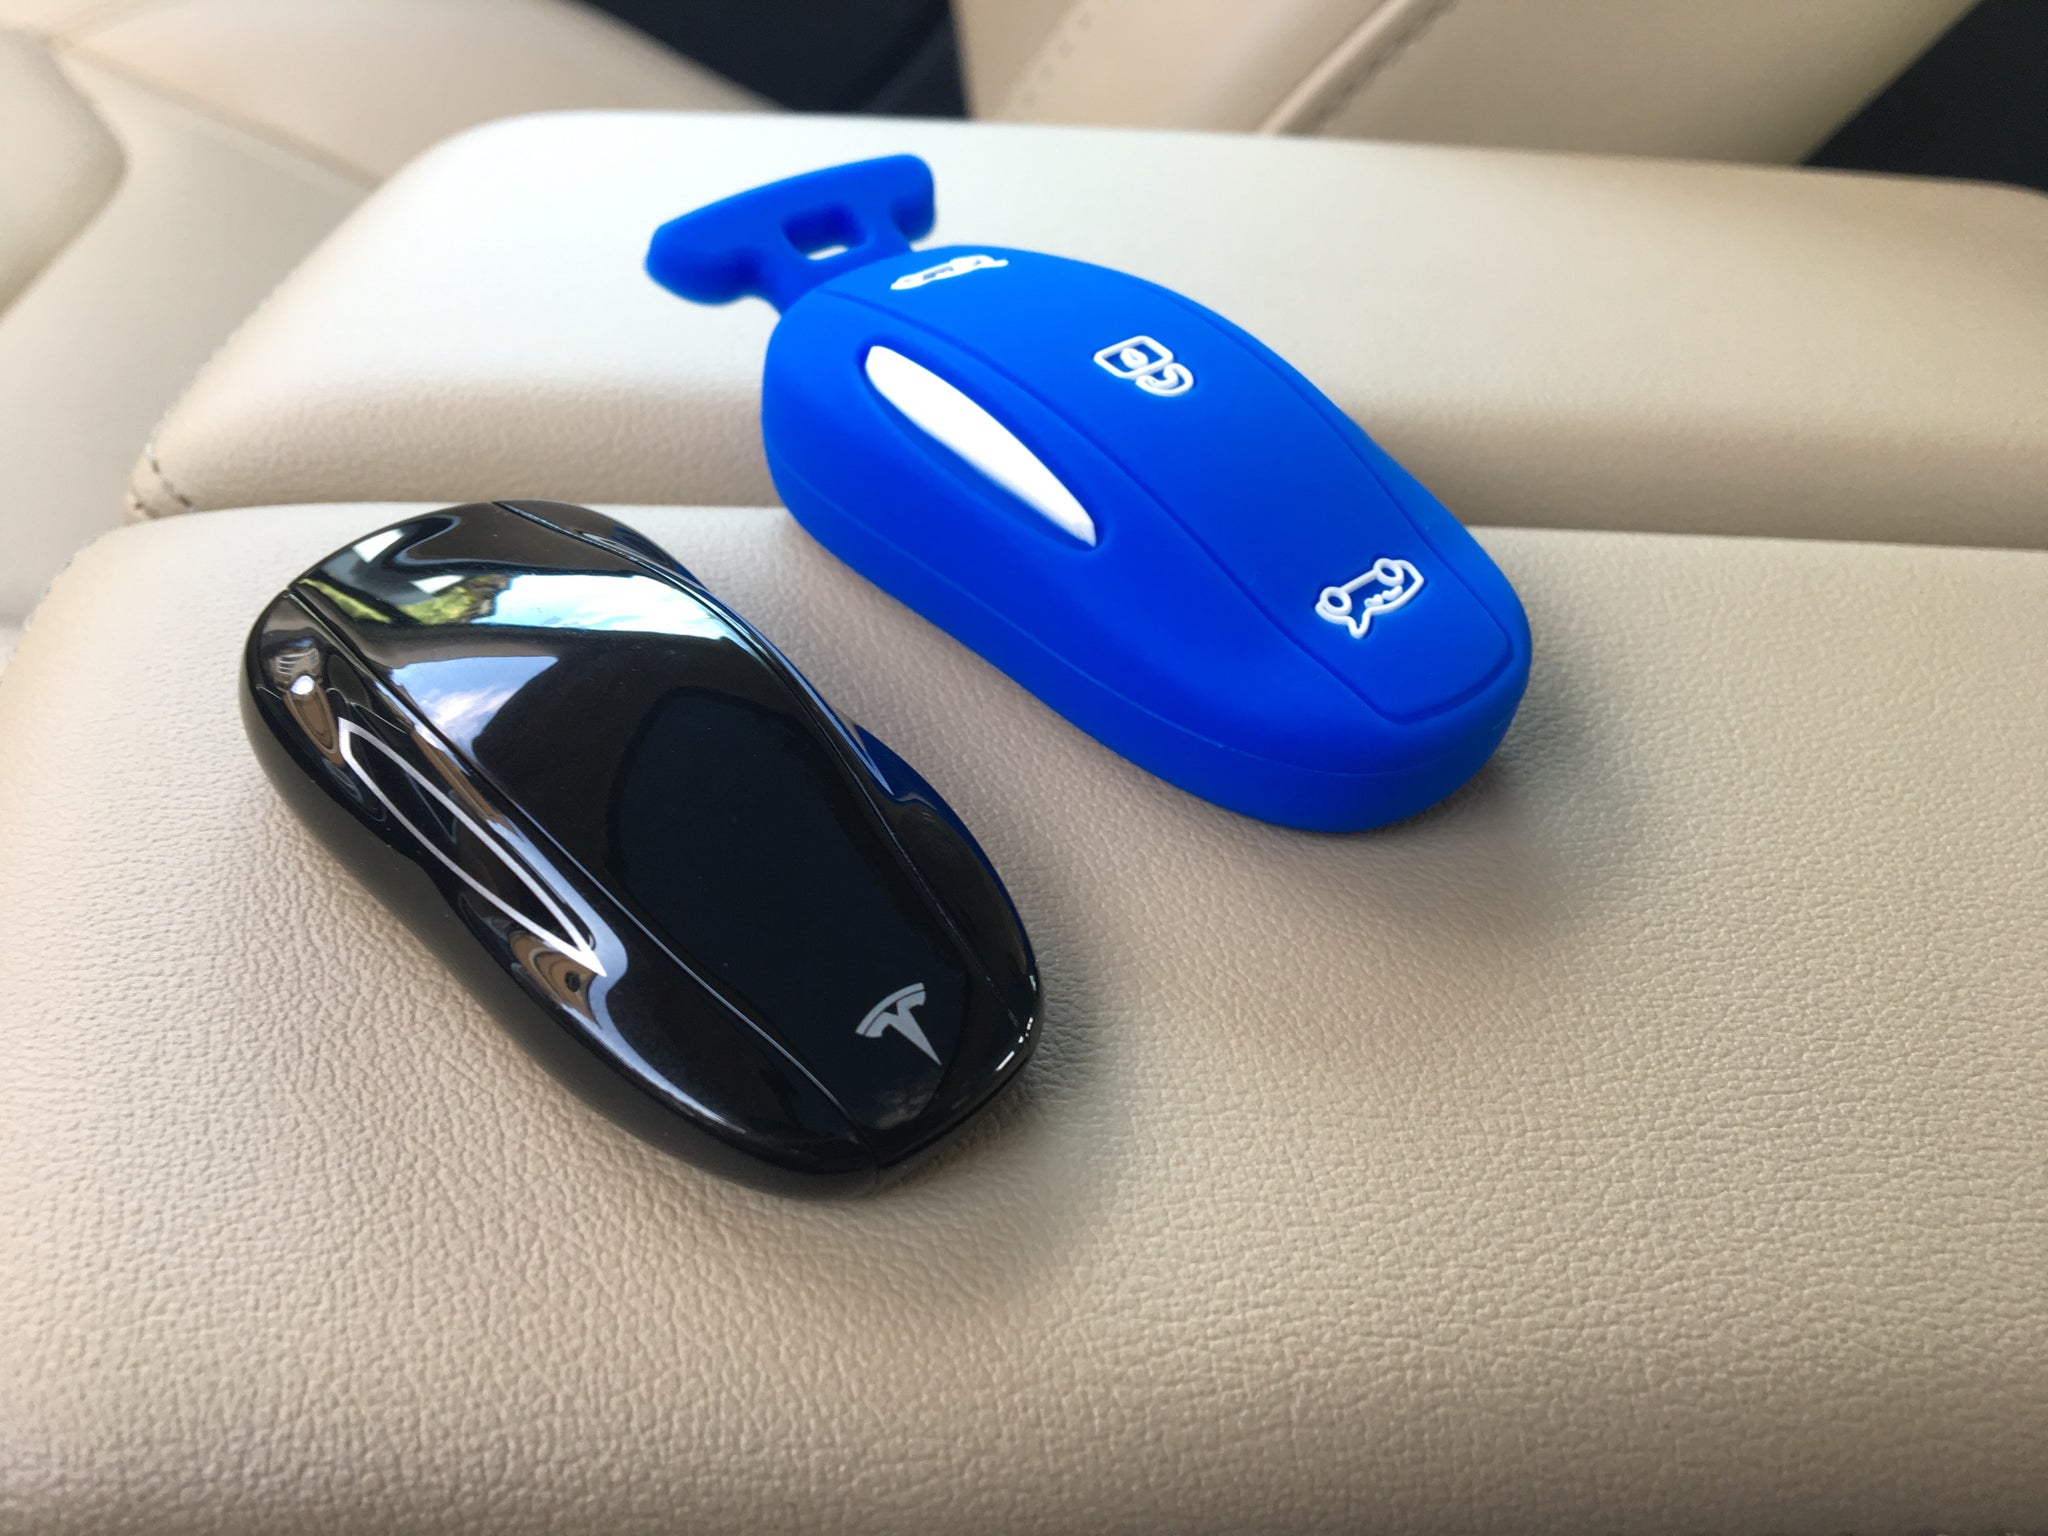 Replacement silicone key fob for Tesla Model S Model X